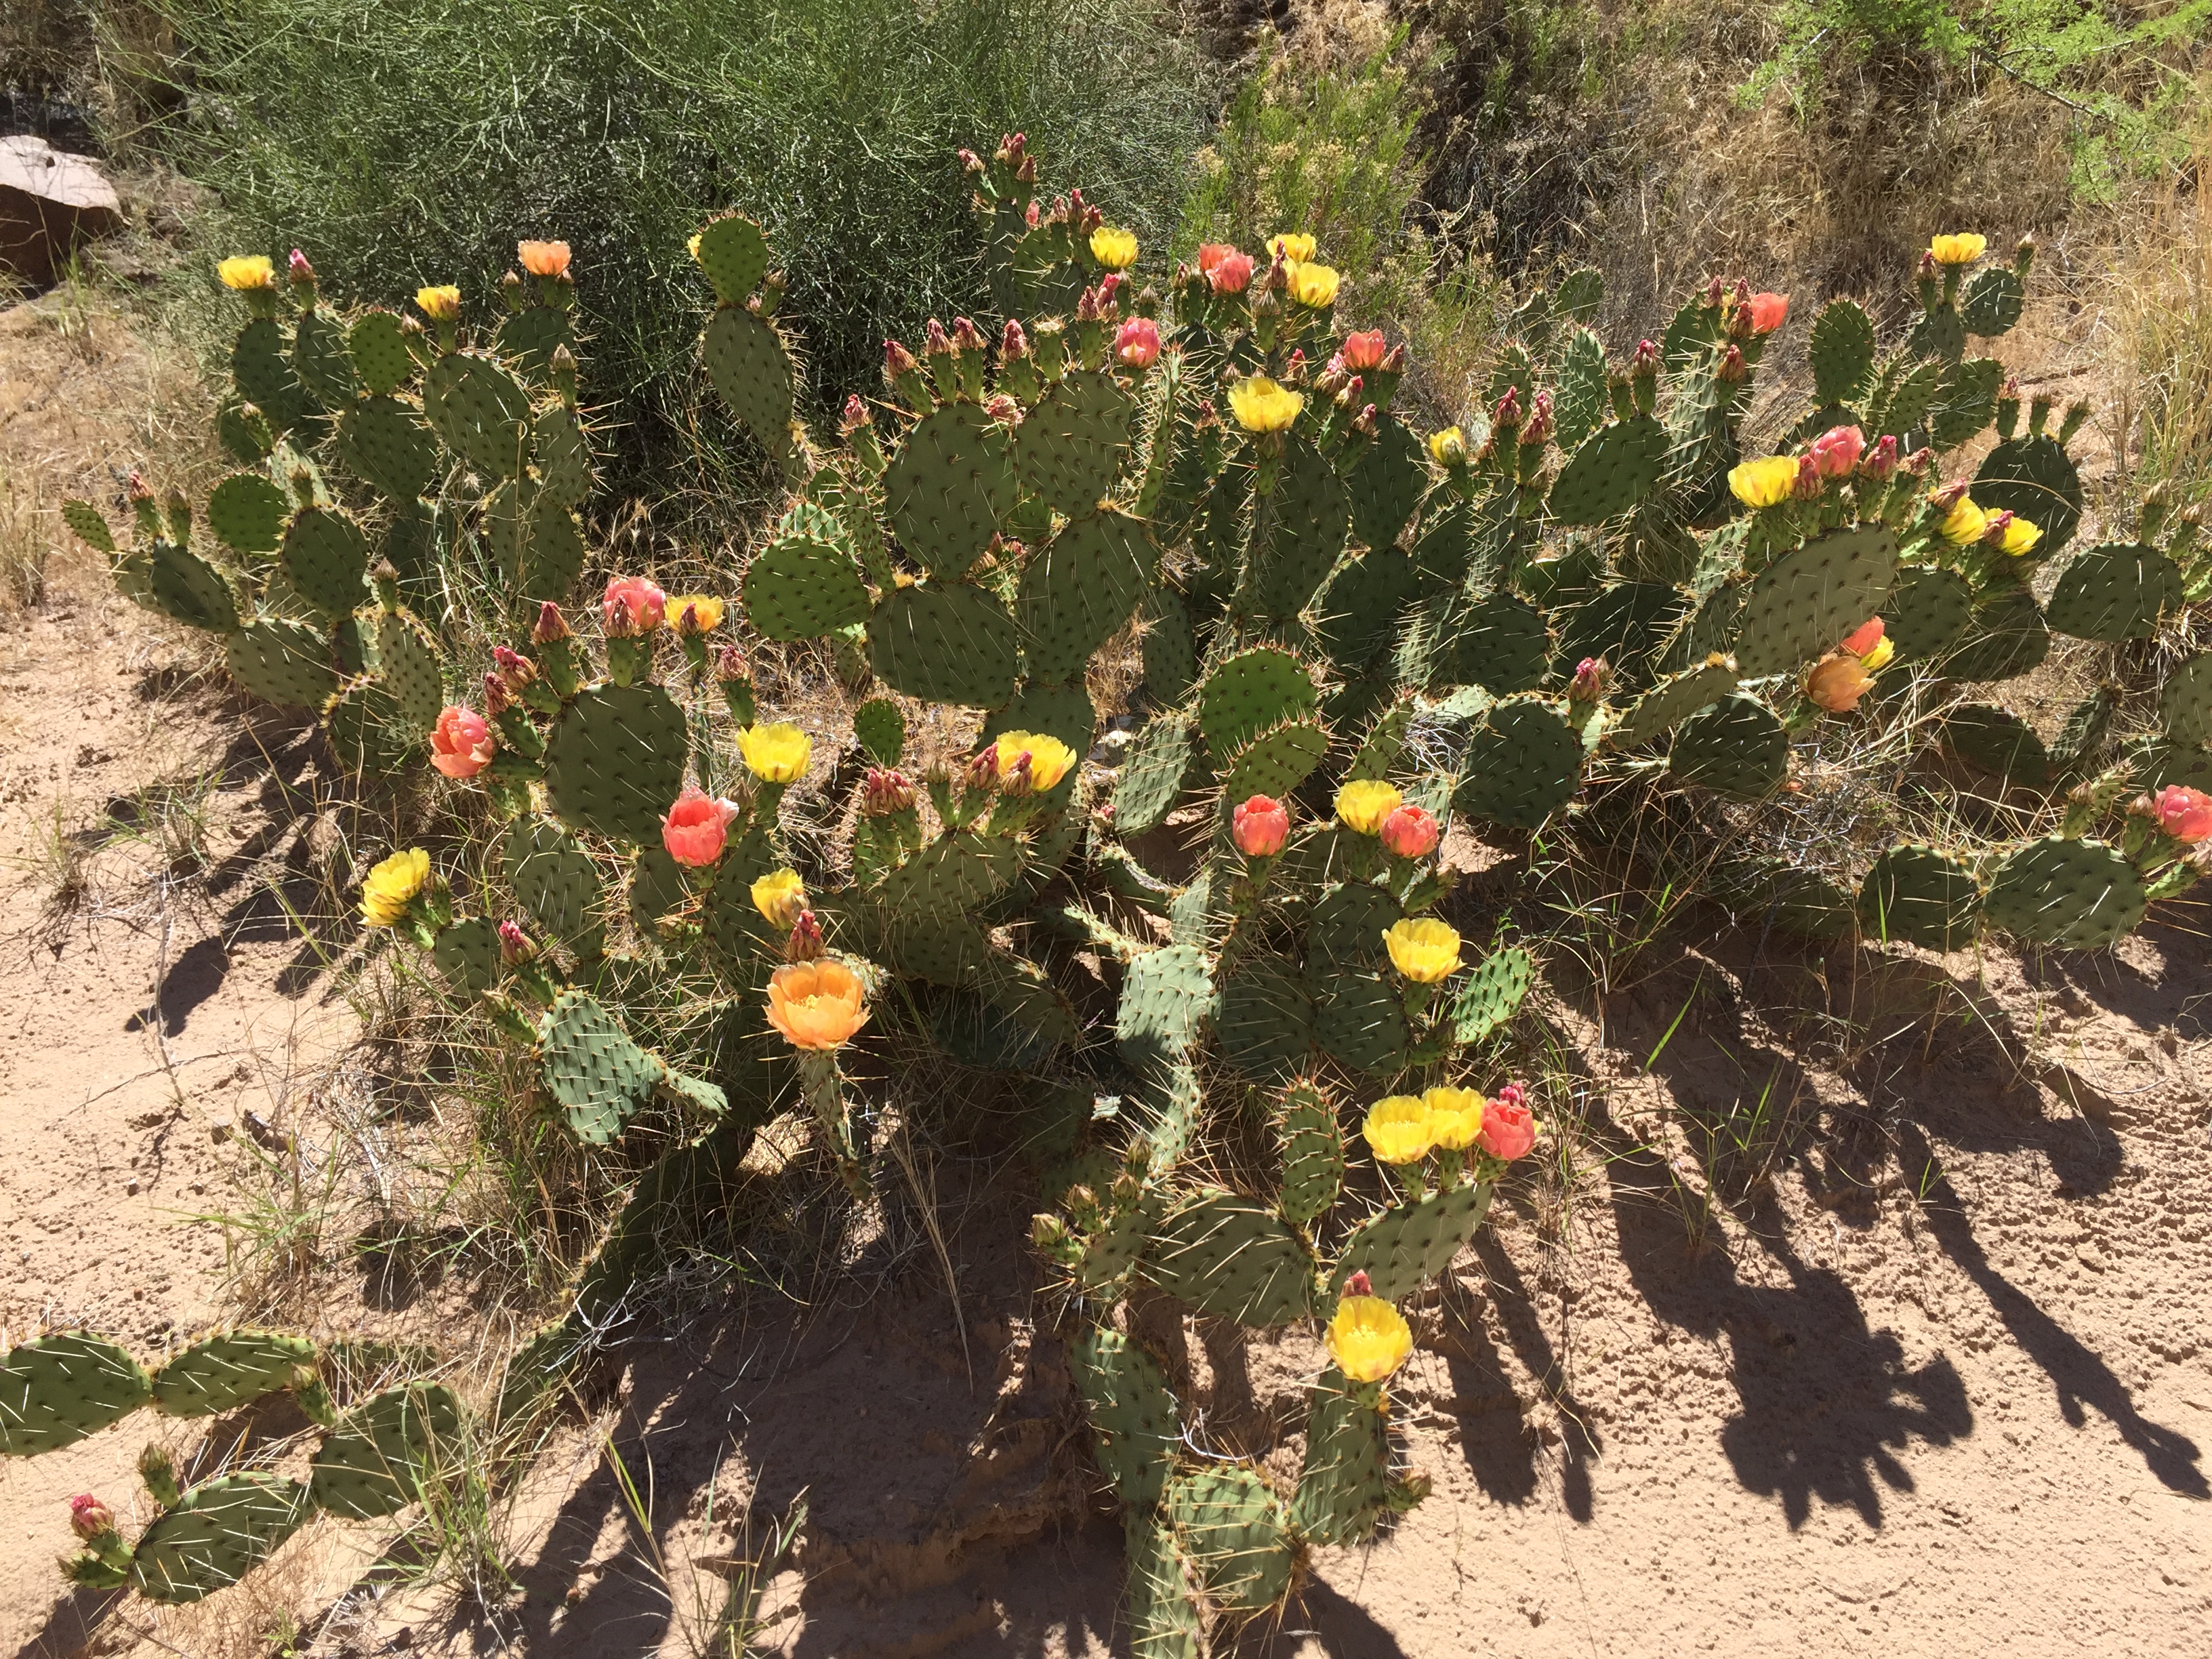 Flowering Cactus on Grand Canyon Challenge